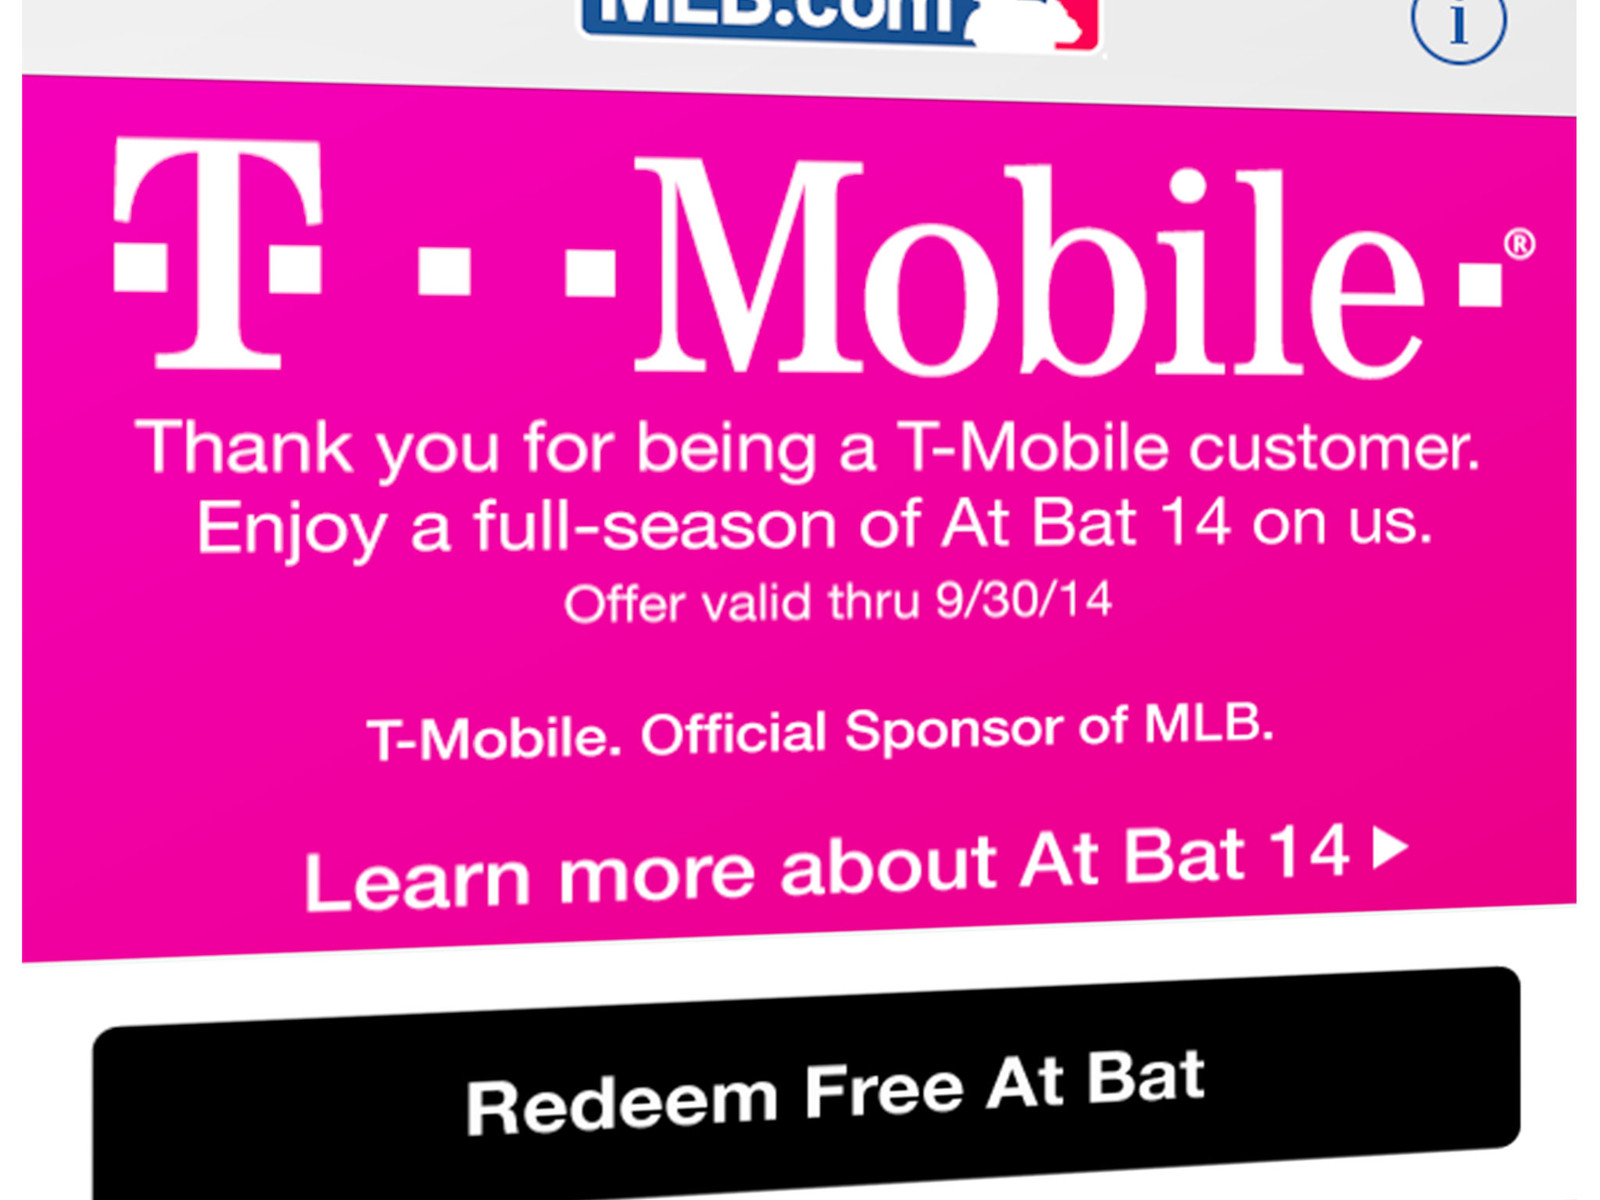 t mobile mlb promo - for some reason we don't have an alt tag here